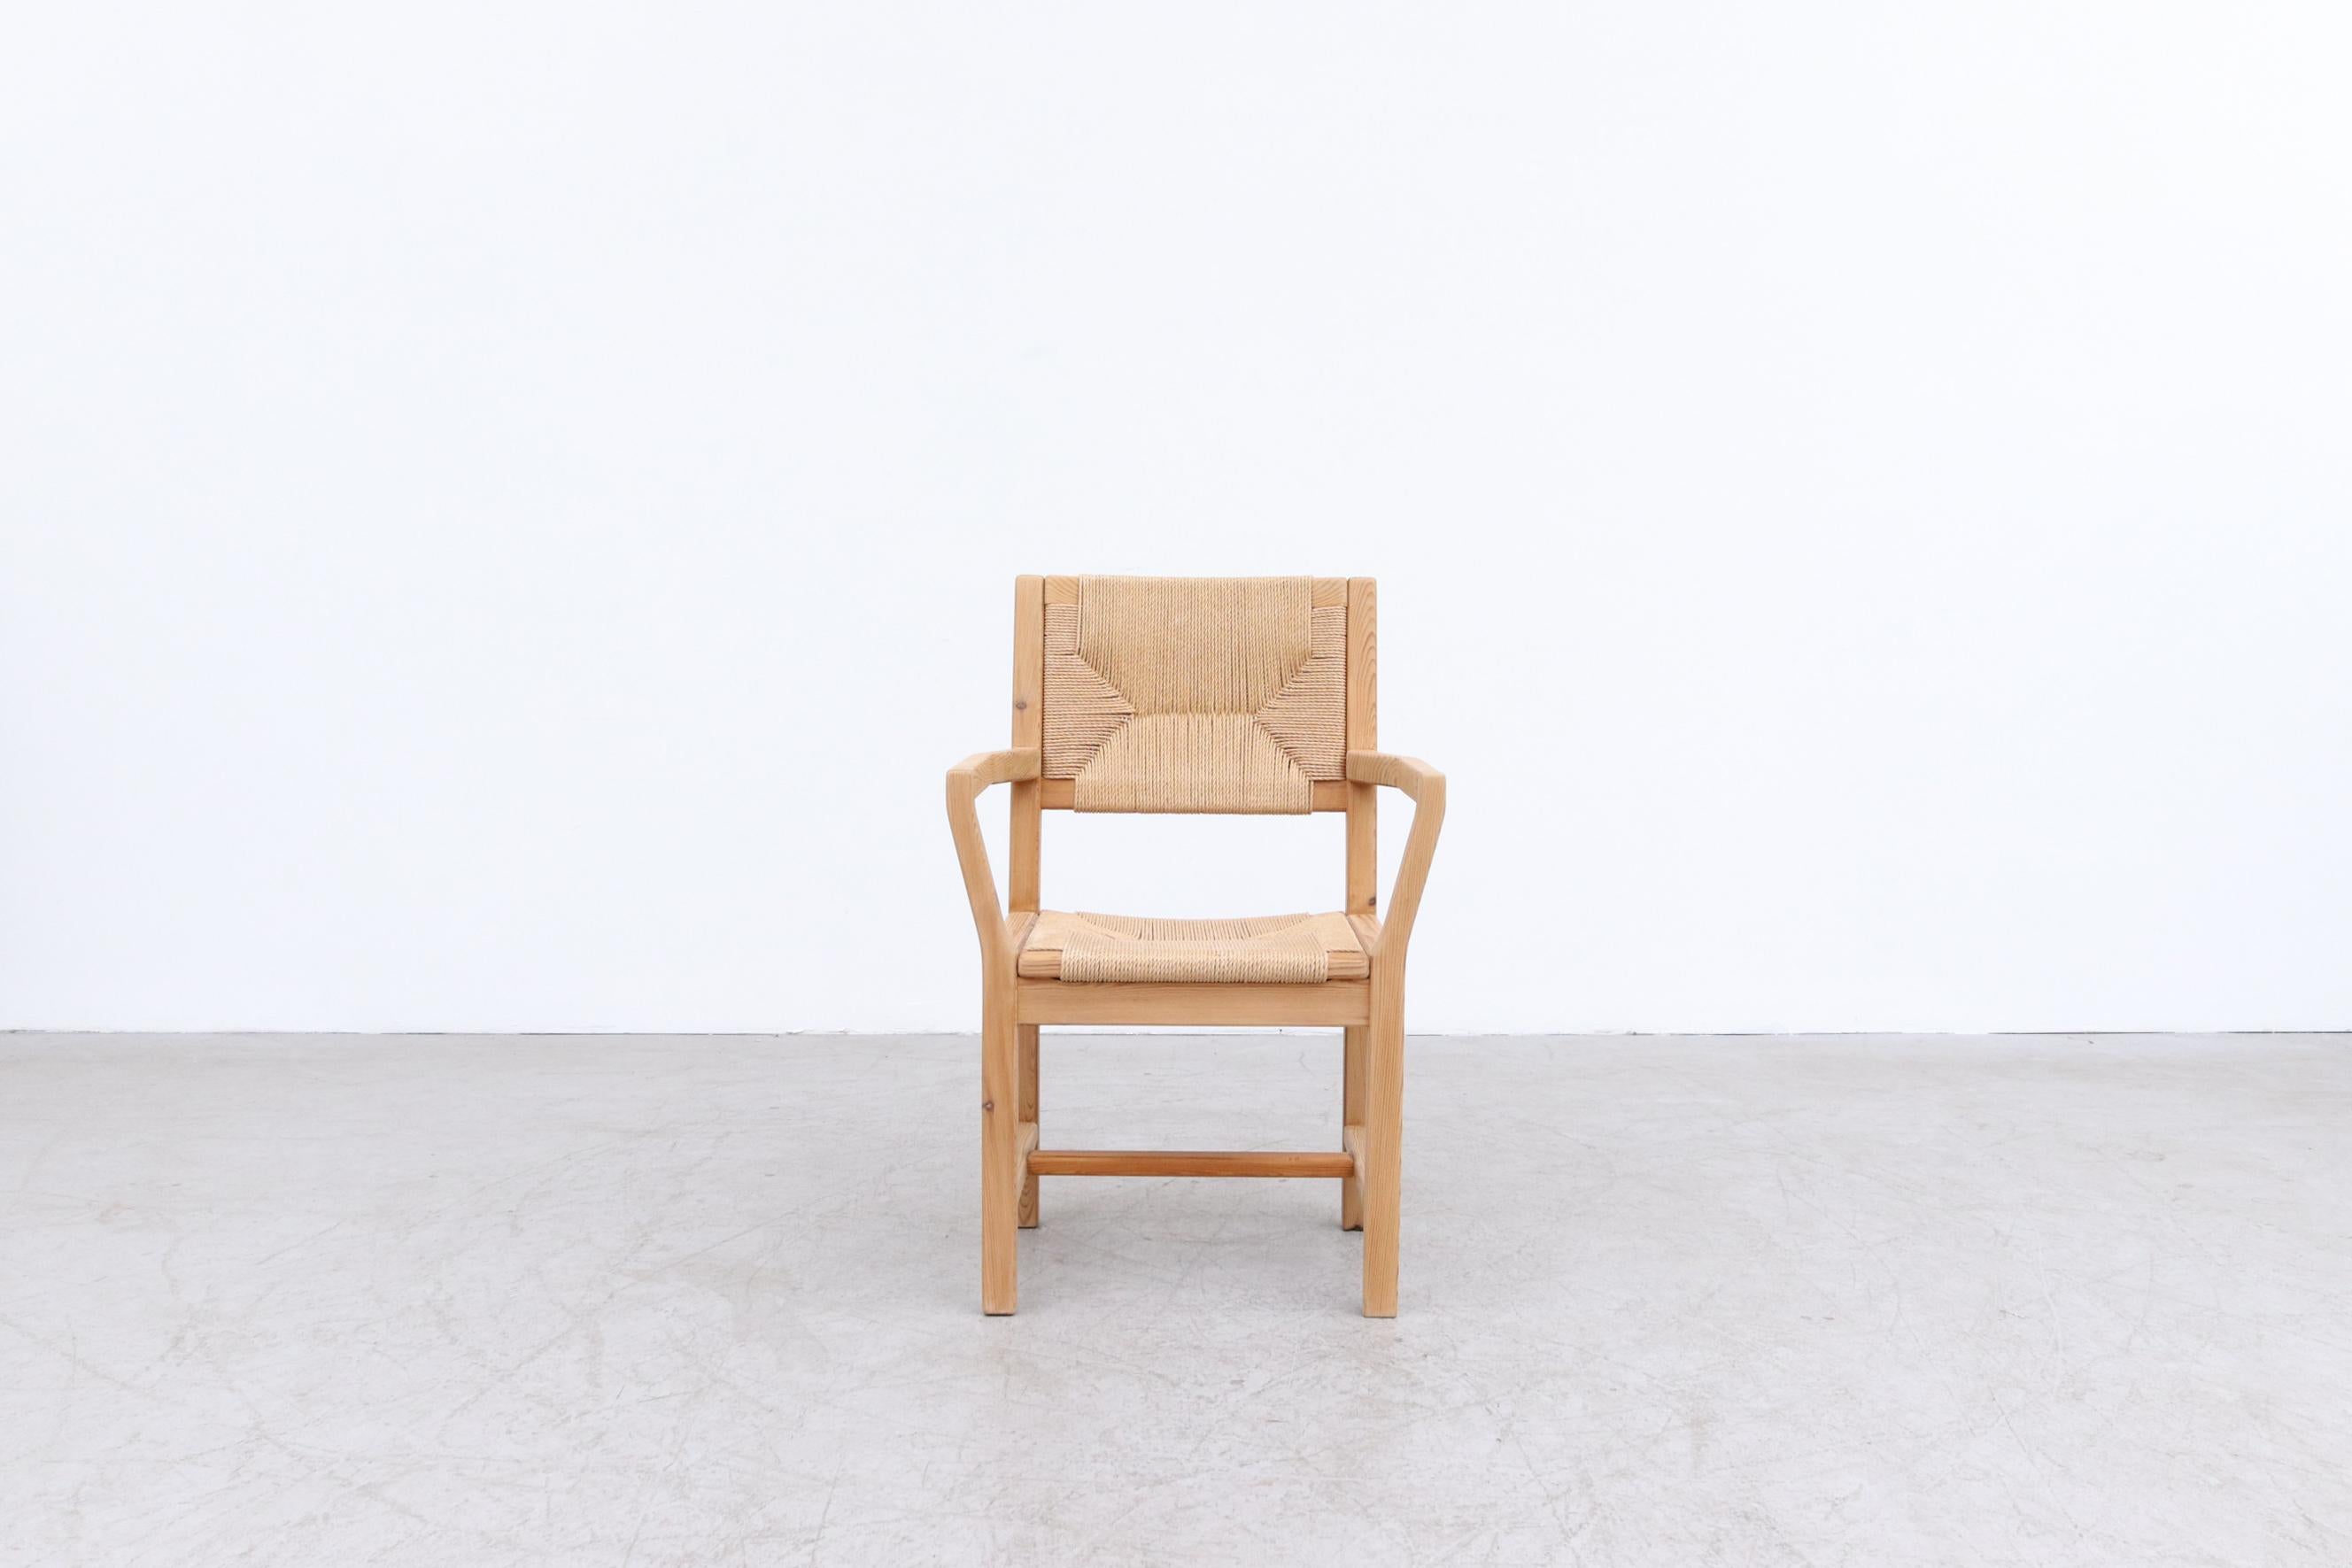 Set of 10 Tage Poulsen pine arm chairs for Gramrode Møbelfabrik, 1970s. Natural pine frames in original condition with paper cord seating. Lightly waxed, in otherwise good original condition. Wear is consistent with their age and use. Set price.